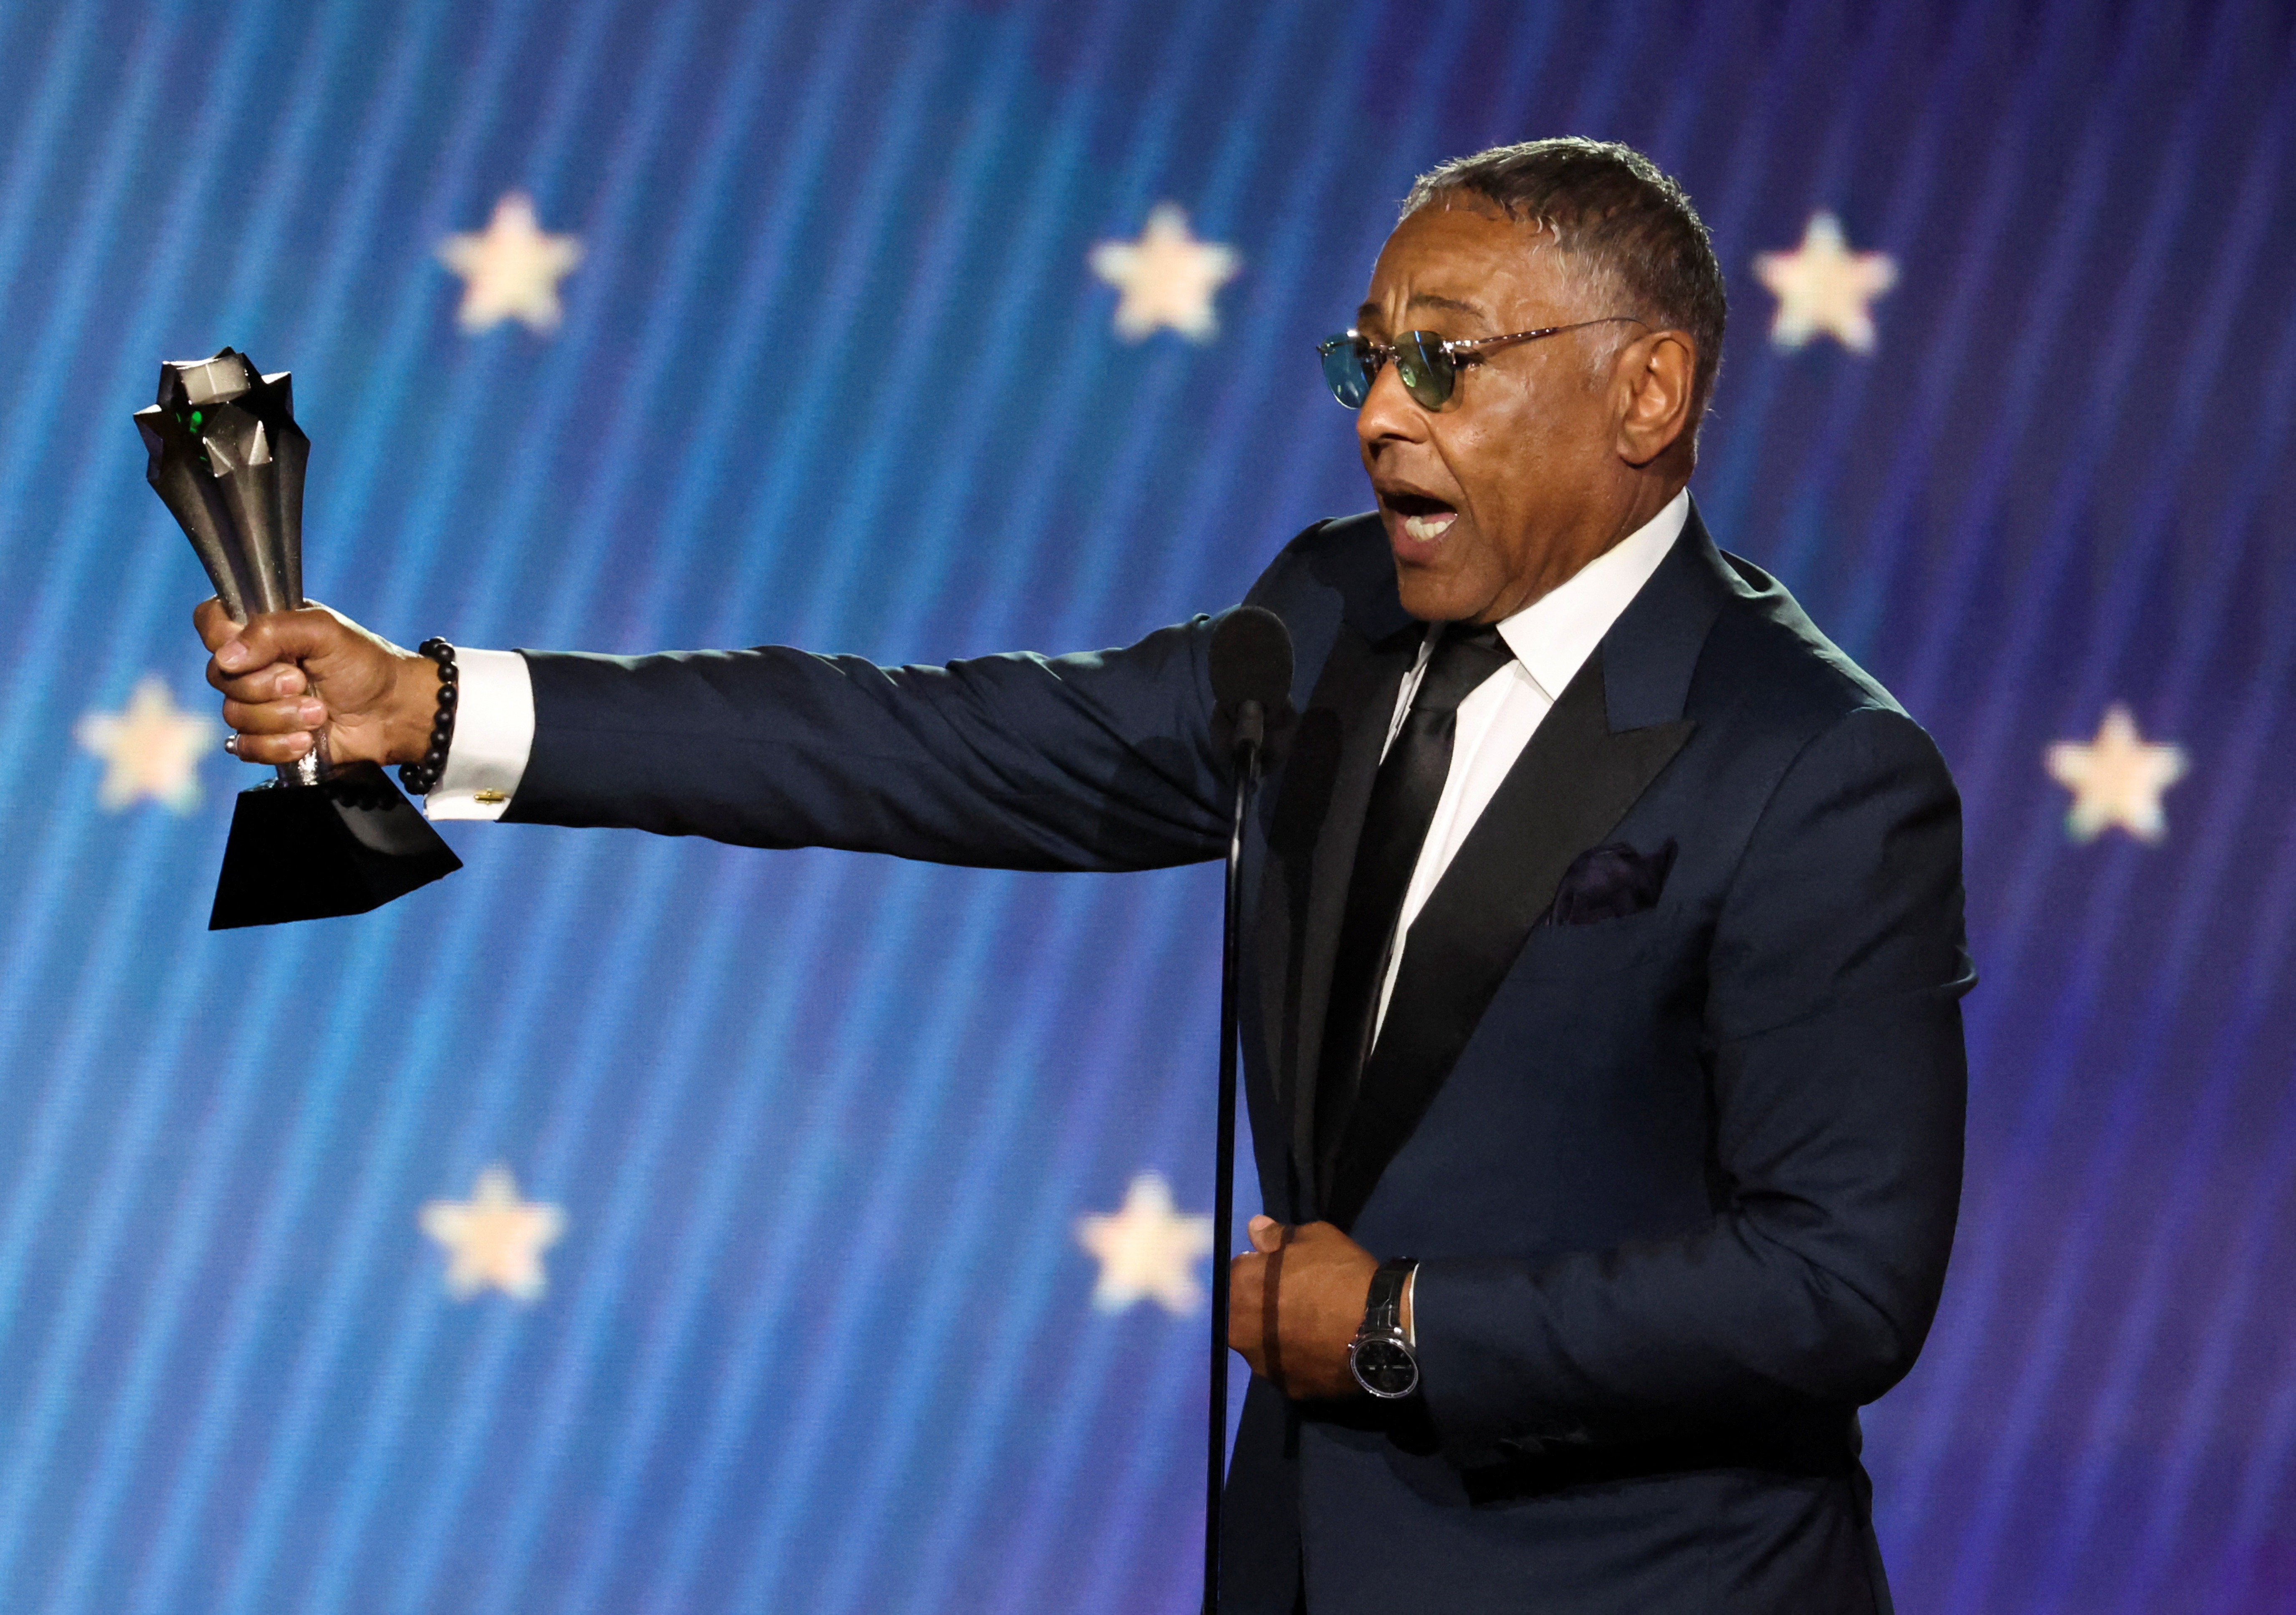 Giancarlo Esposito accepts the Best Supporting Actor in a Drama Series for "Better Call Saul" during the 28th annual Critics Choice Awards in Los Angeles, California, U.S., January 15, 2023. REUTERS/Mario Anzuoni